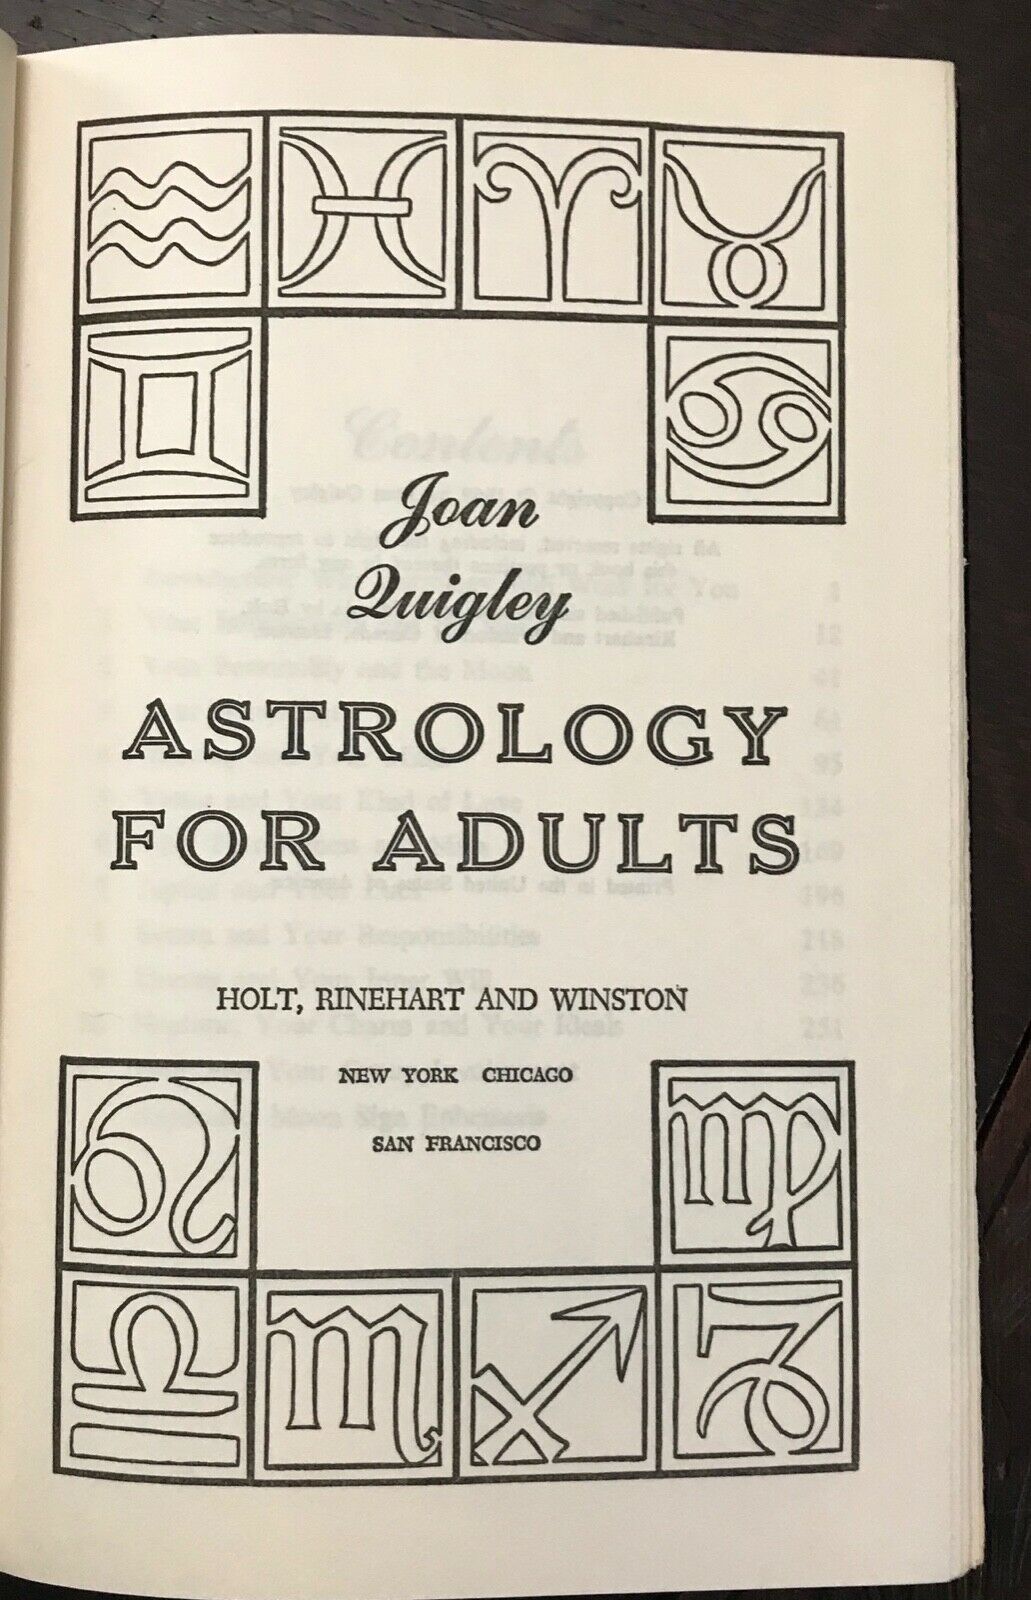 ASTROLOGY FOR ADULTS - Quigley, 1969 ZODIAC DIVINATION HOROSCOPE 